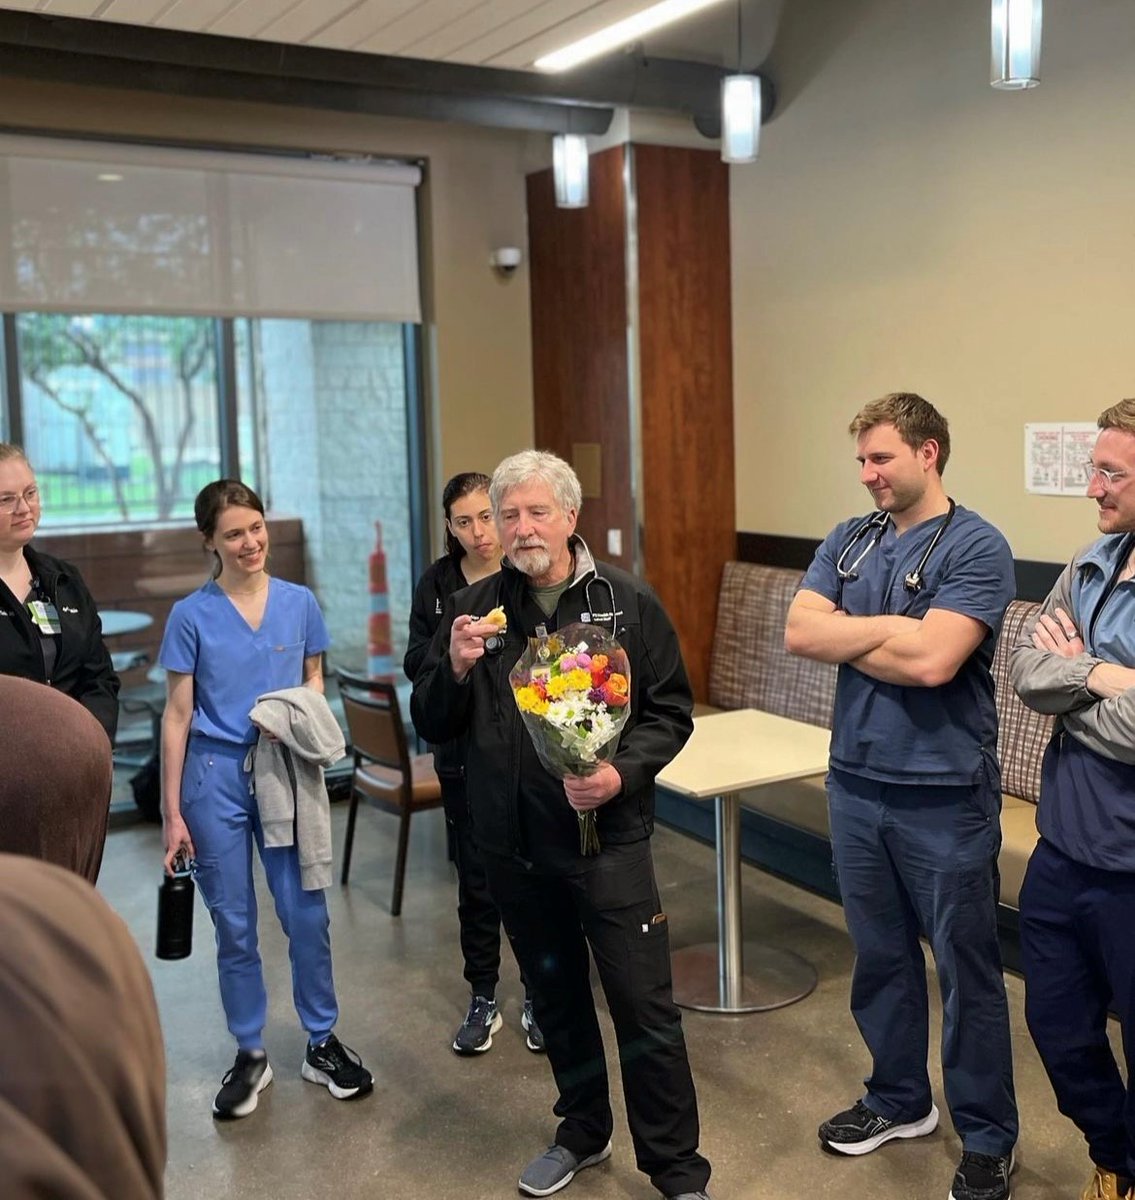 It is the end of a magnificent era for our HOME clinic as we bid farewell to our coordinator Dr. Alan Podawiltz. He has been with our HOME Clinic from day one 15 years ago & is a pillar of its success. He is retiring from @JPS_Health after decades of service and we thank him. 👏